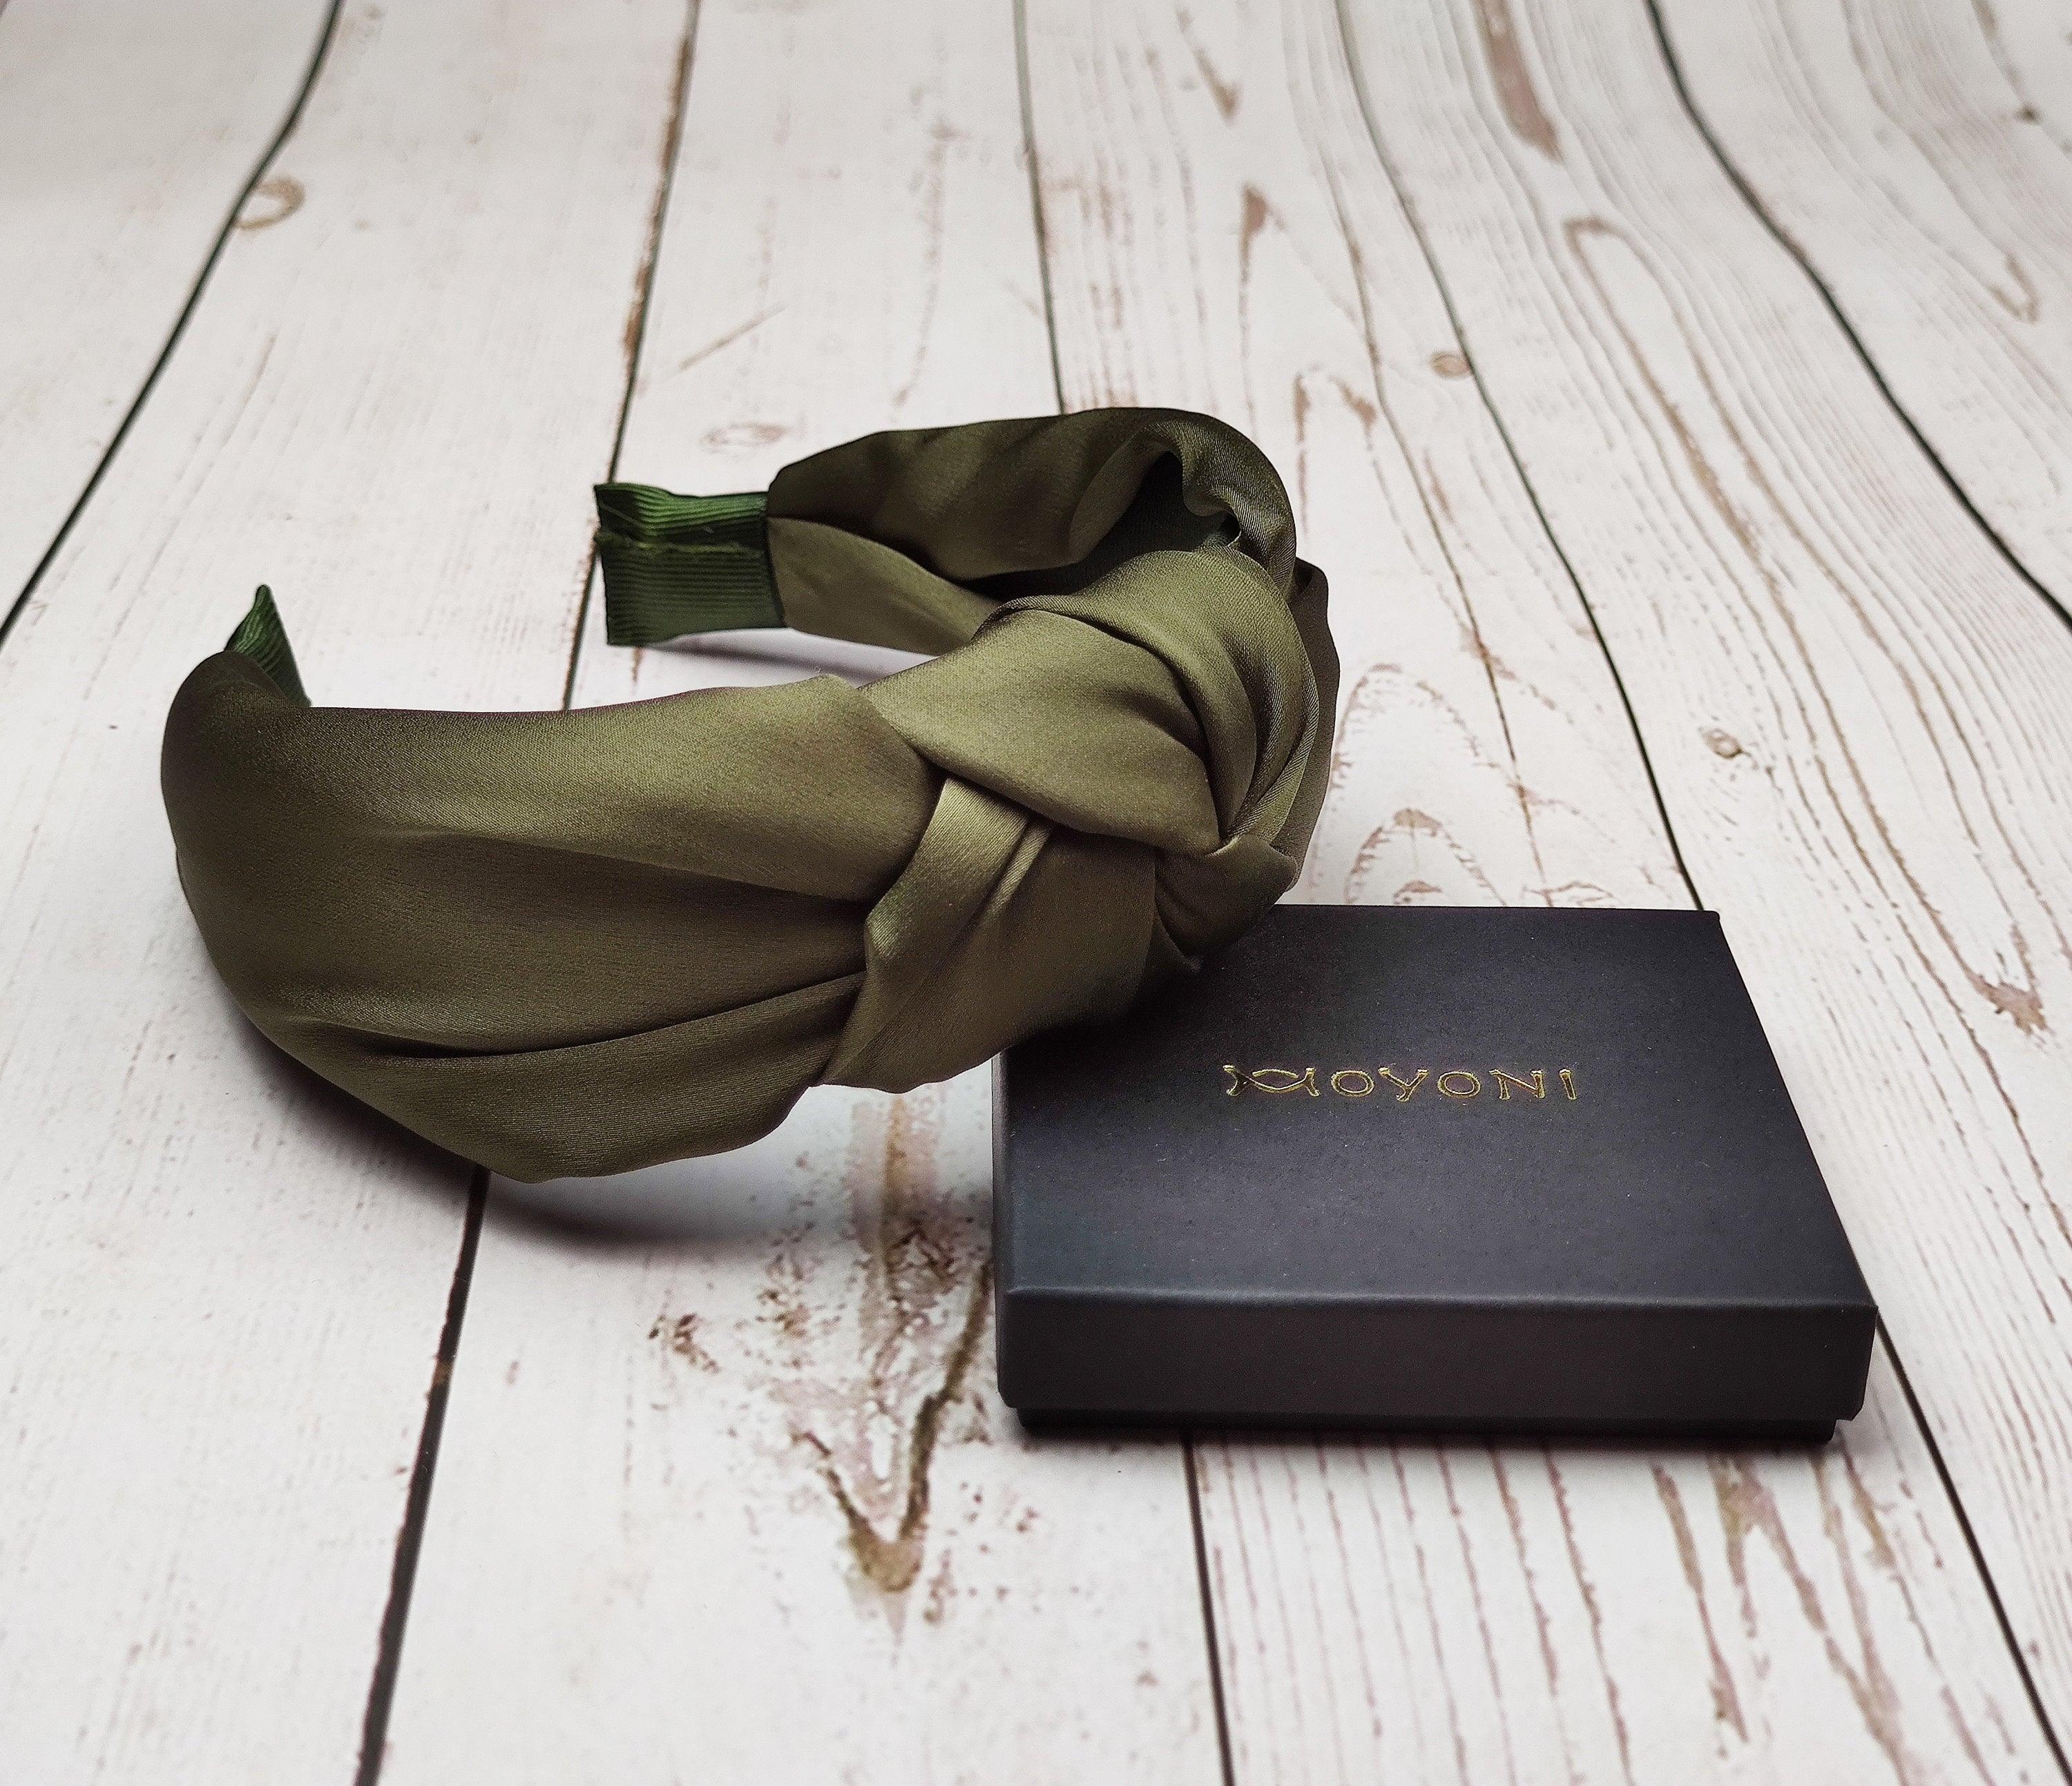 Beautiful Army Green Satin Knotted Headband - Stylish Women's Twist Headband in Khaki Green - Wide Padded Hairband for Fashionable Look available at Moyoni Design